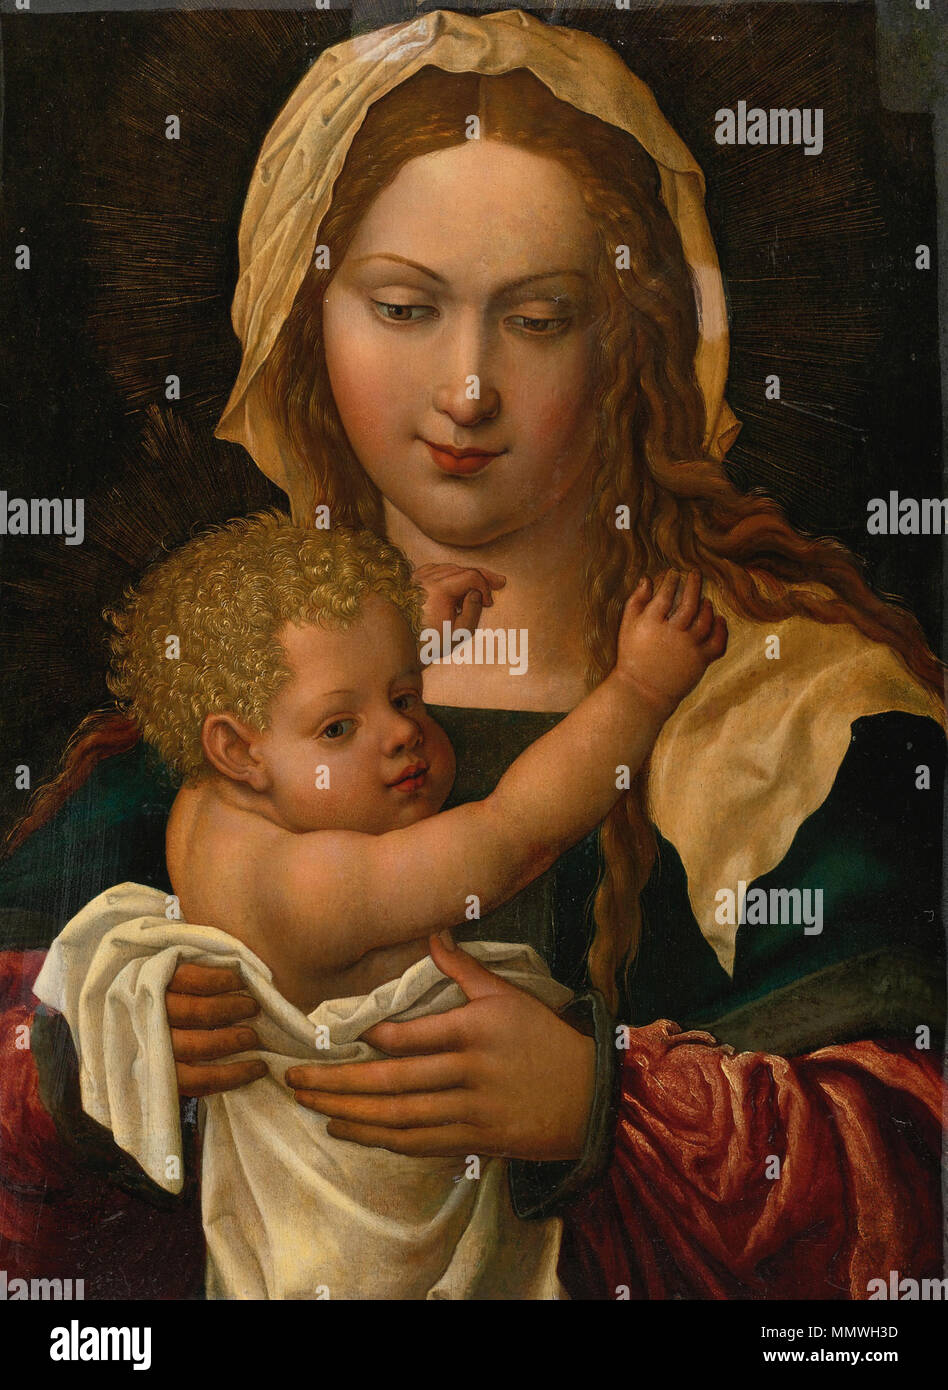 . Virgin and Child  . early 16th century.   Circle of Joos van Cleve  (circa 1485 – 1540/1541)     Alternative names Joos van der Beke, Joos van der Beken, Joos van Cleef, Master of the Death of the Virgin  Description Flemish painter and draughtsman  Date of birth/death circa 1485 between 10 November 1540 and 13 April 1541  Location of birth/death Cleves (?) Antwerp  Work location Kalkar (circa 1505–1508), Bruges (1507–1511), Antwerp (1511–1540), France (1529), London (1535–1536)  Authority control  : Q153472 VIAF:?69201794 ISNI:?0000 0001 1877 5443 ULAN:?500007799 LCCN:?nr91022860 NLA:?35198 Stock Photo